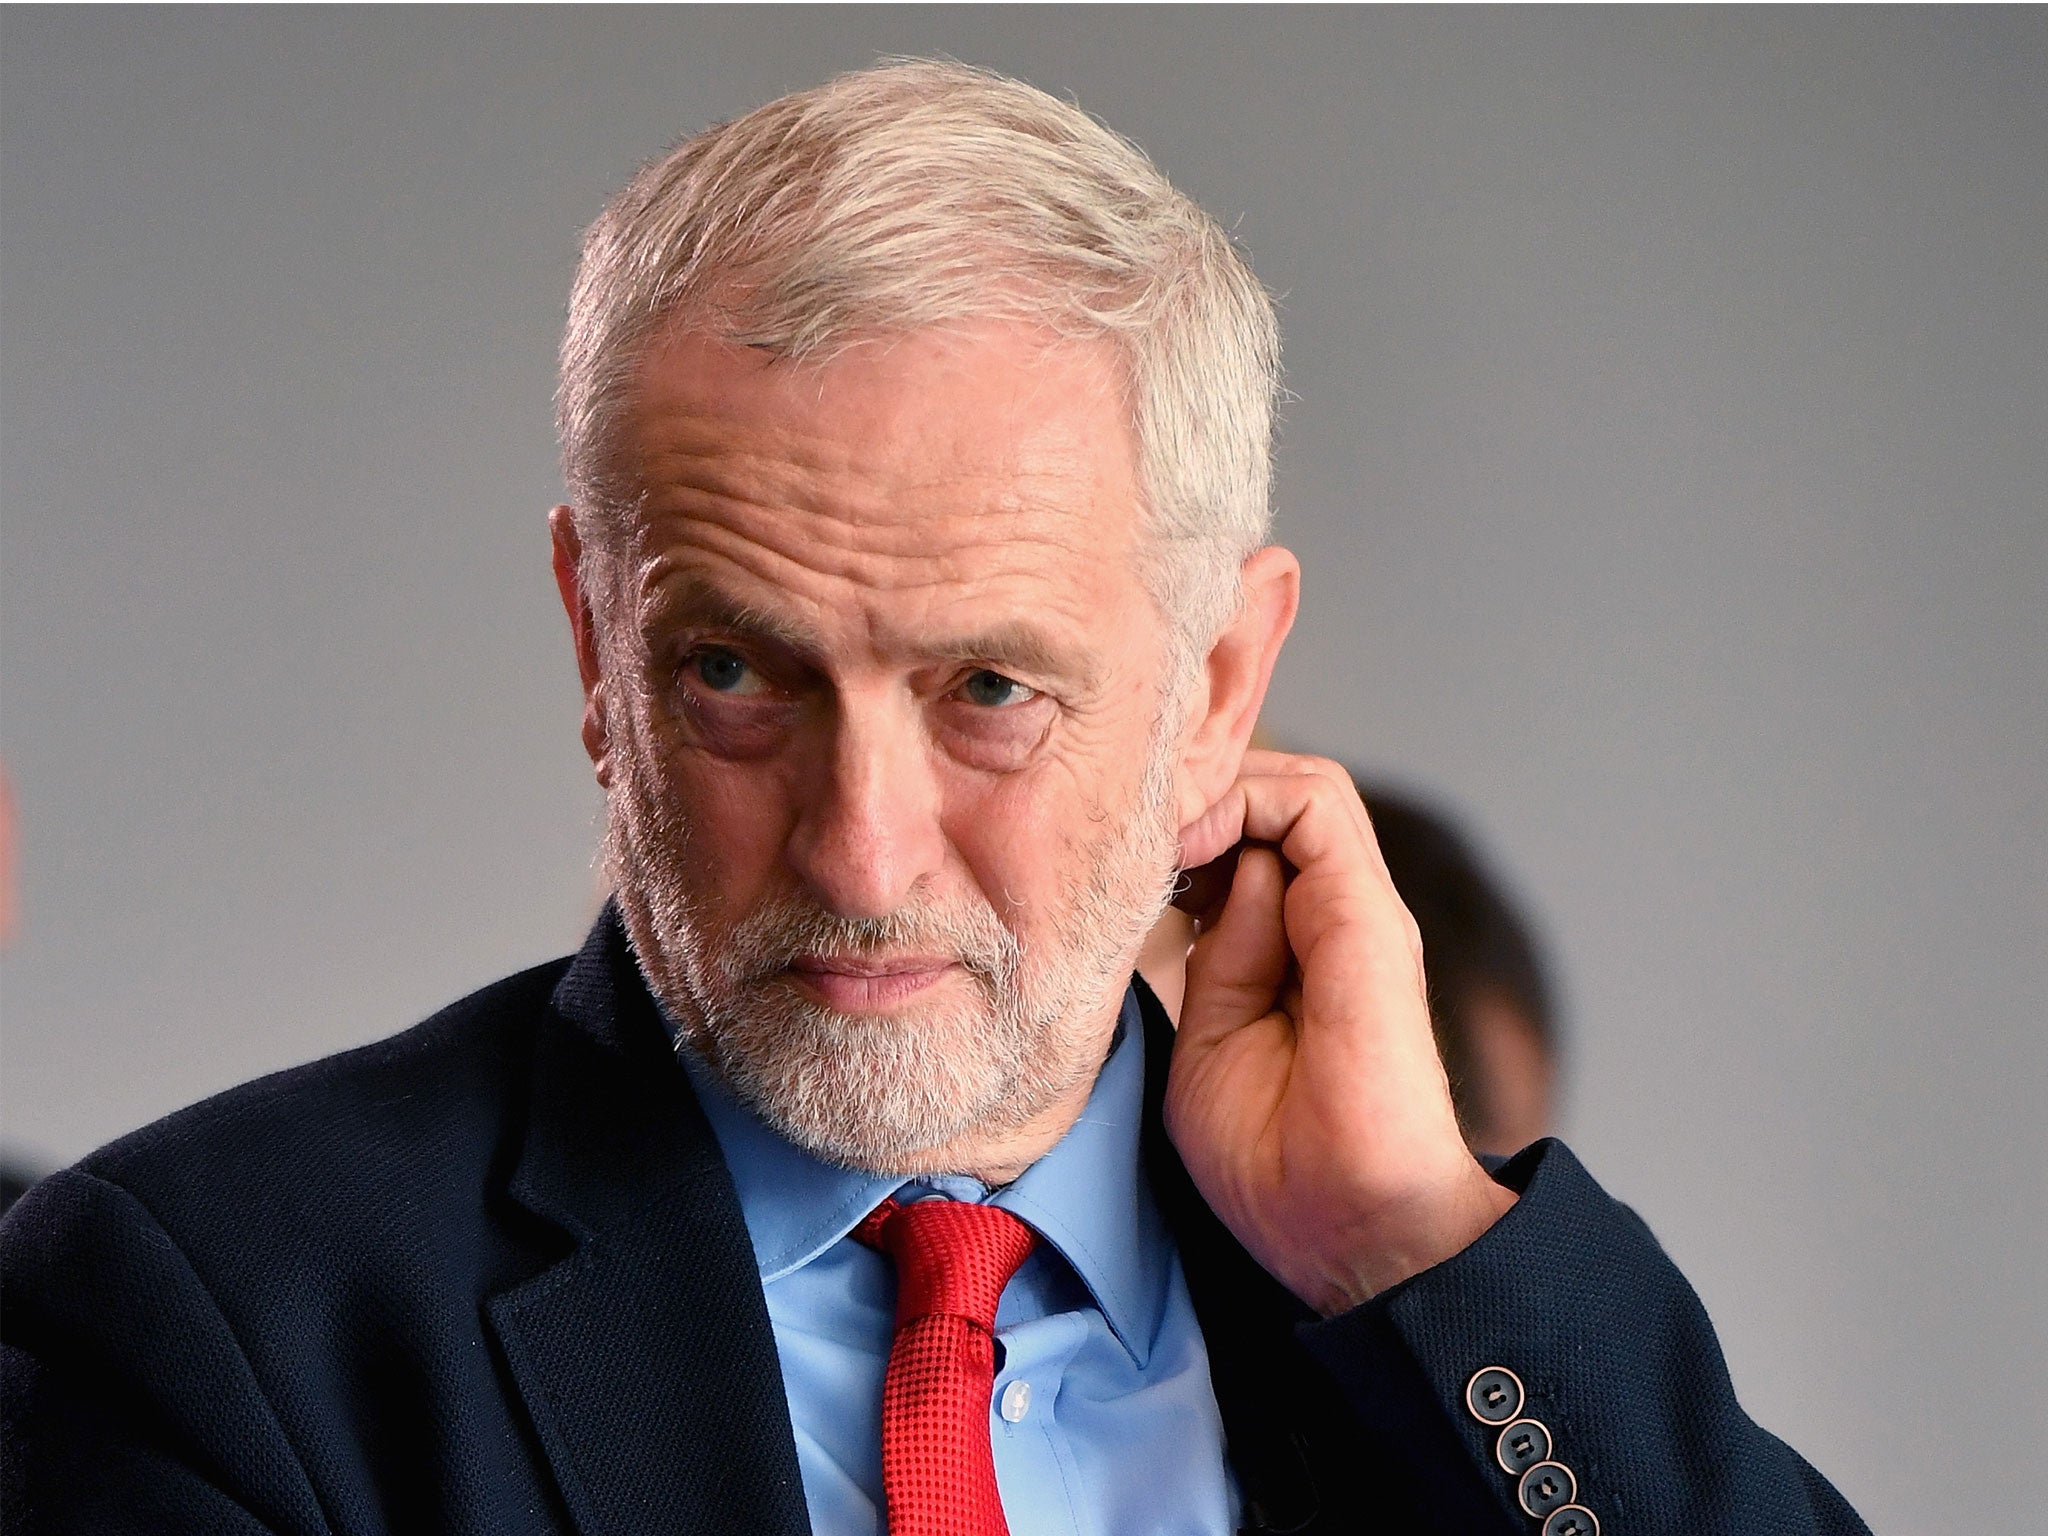 Jeremy Corbyn says he 'wants to heal the rifts' in the Labour Party